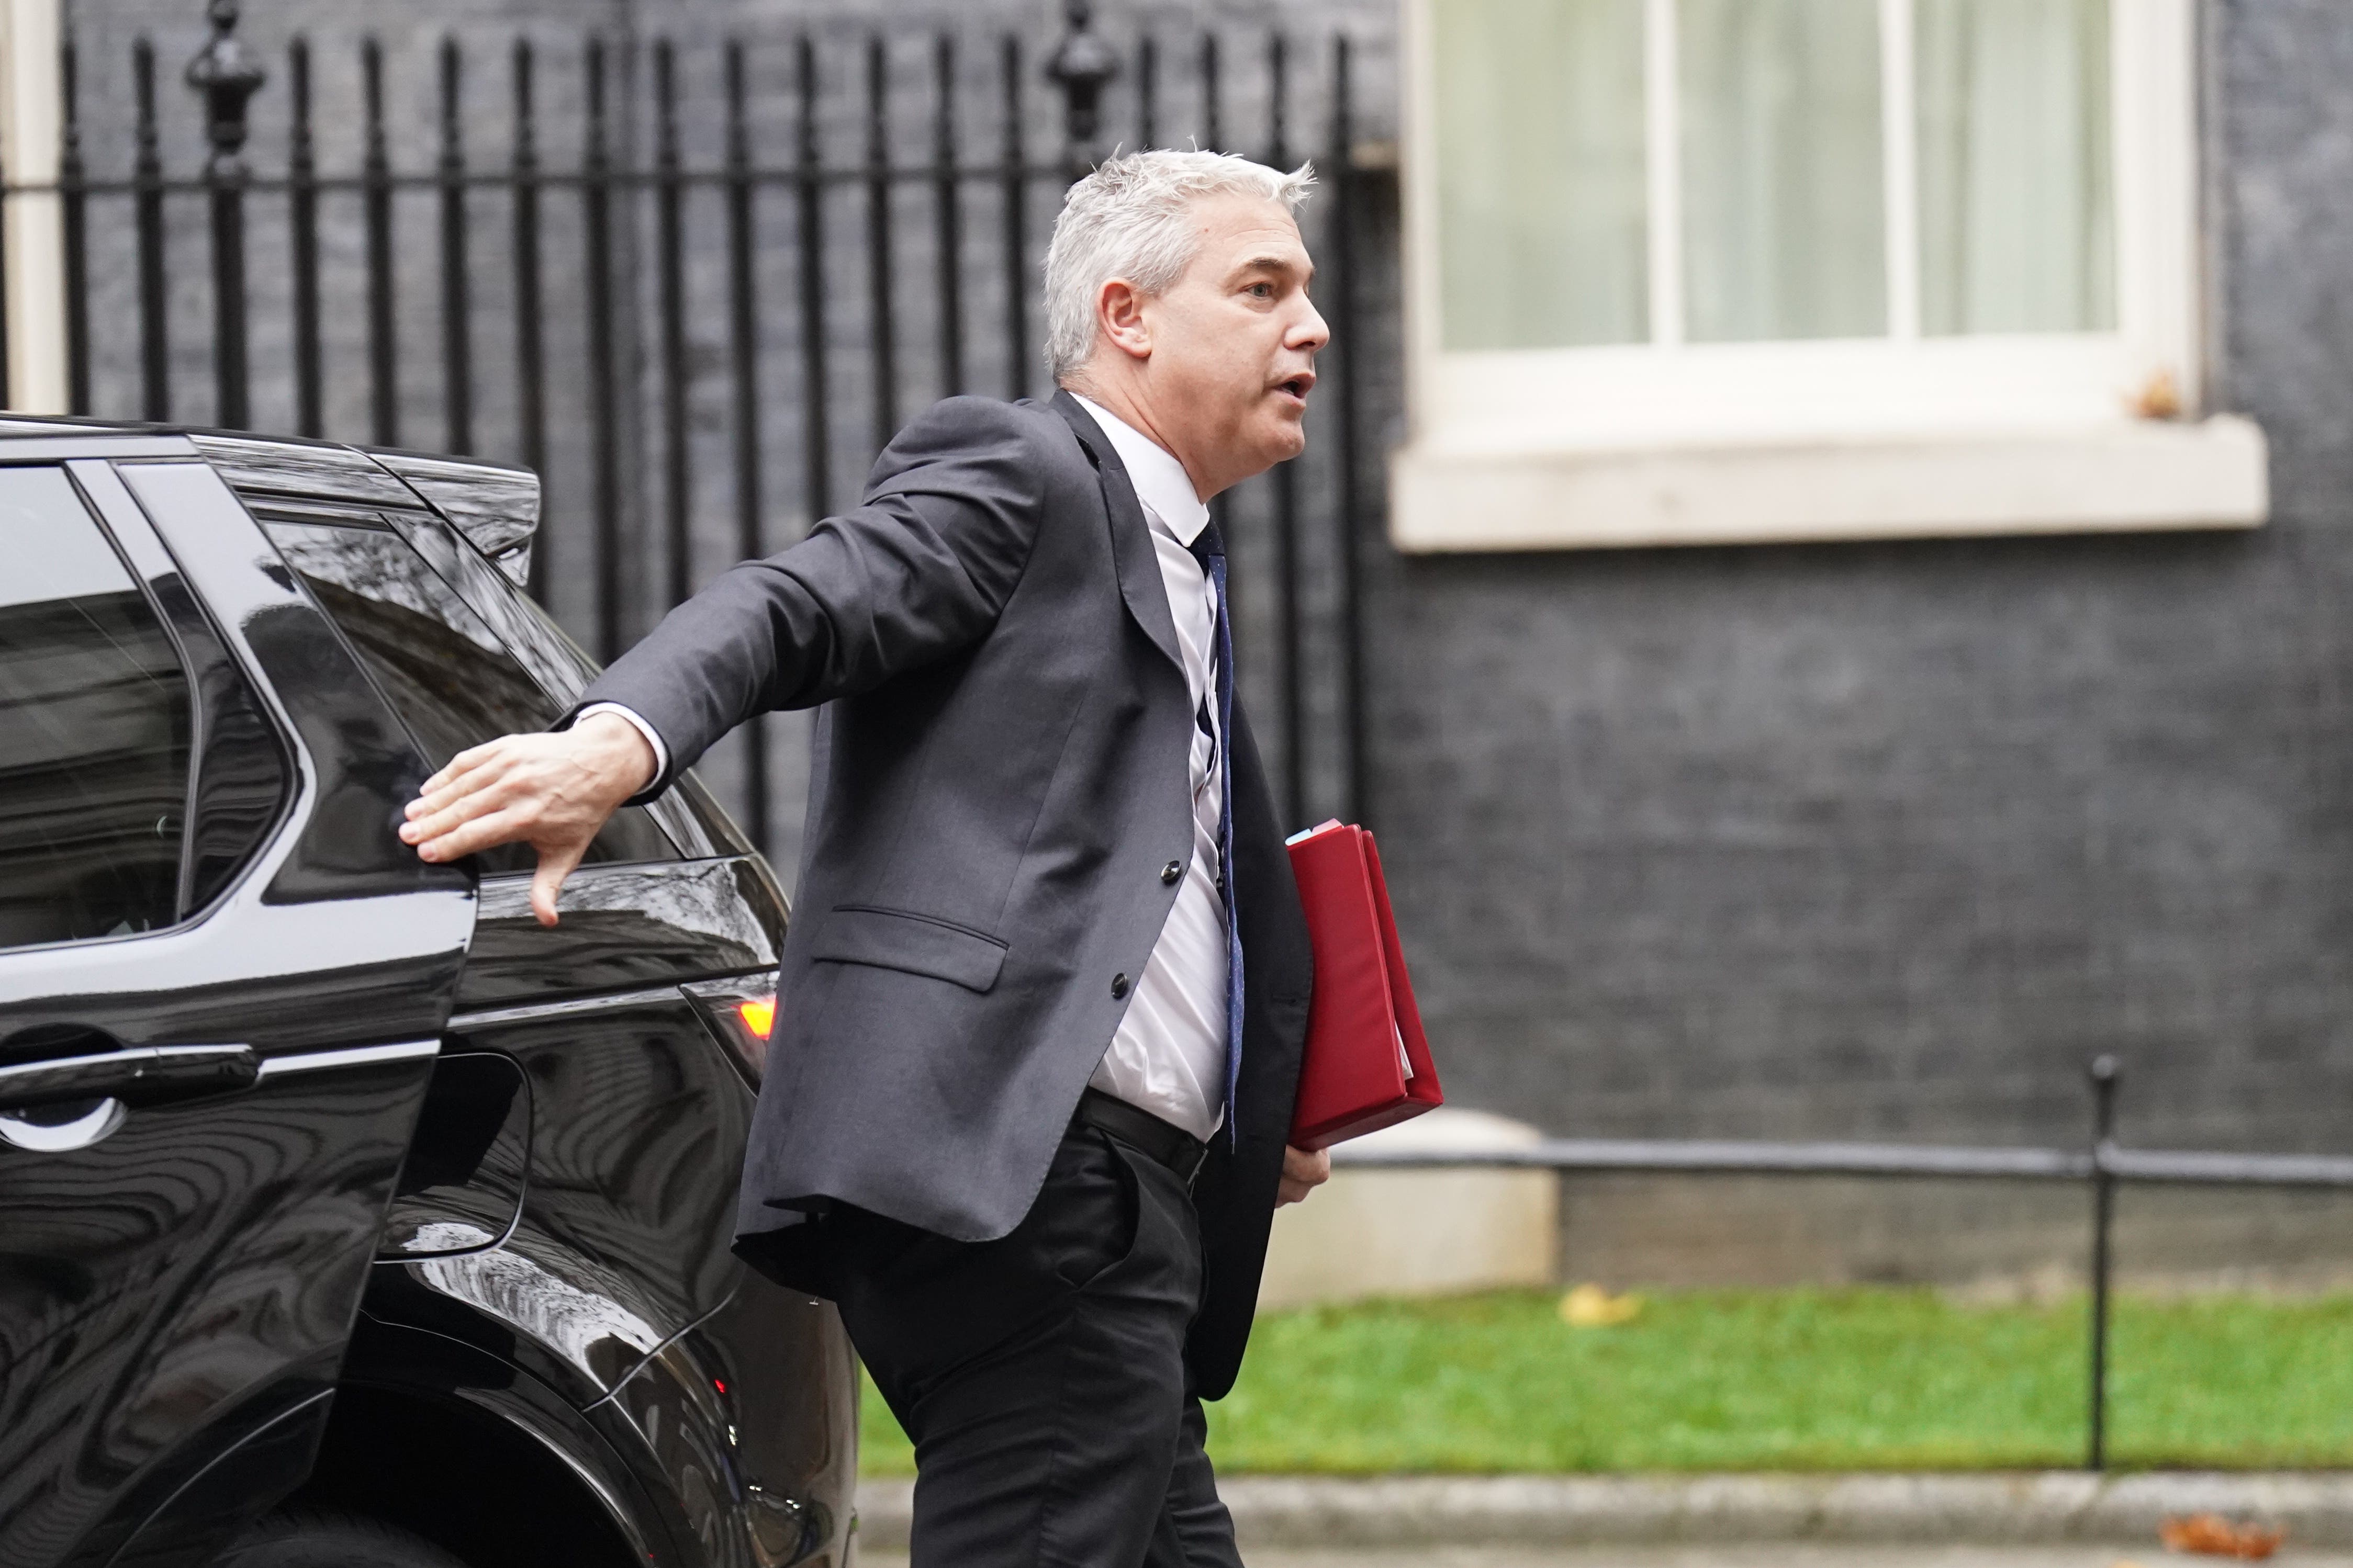 Health Secretary Steve Barclay arriving in Downing Street, London, ahead of a Cabinet meeting (James Manning/PA)